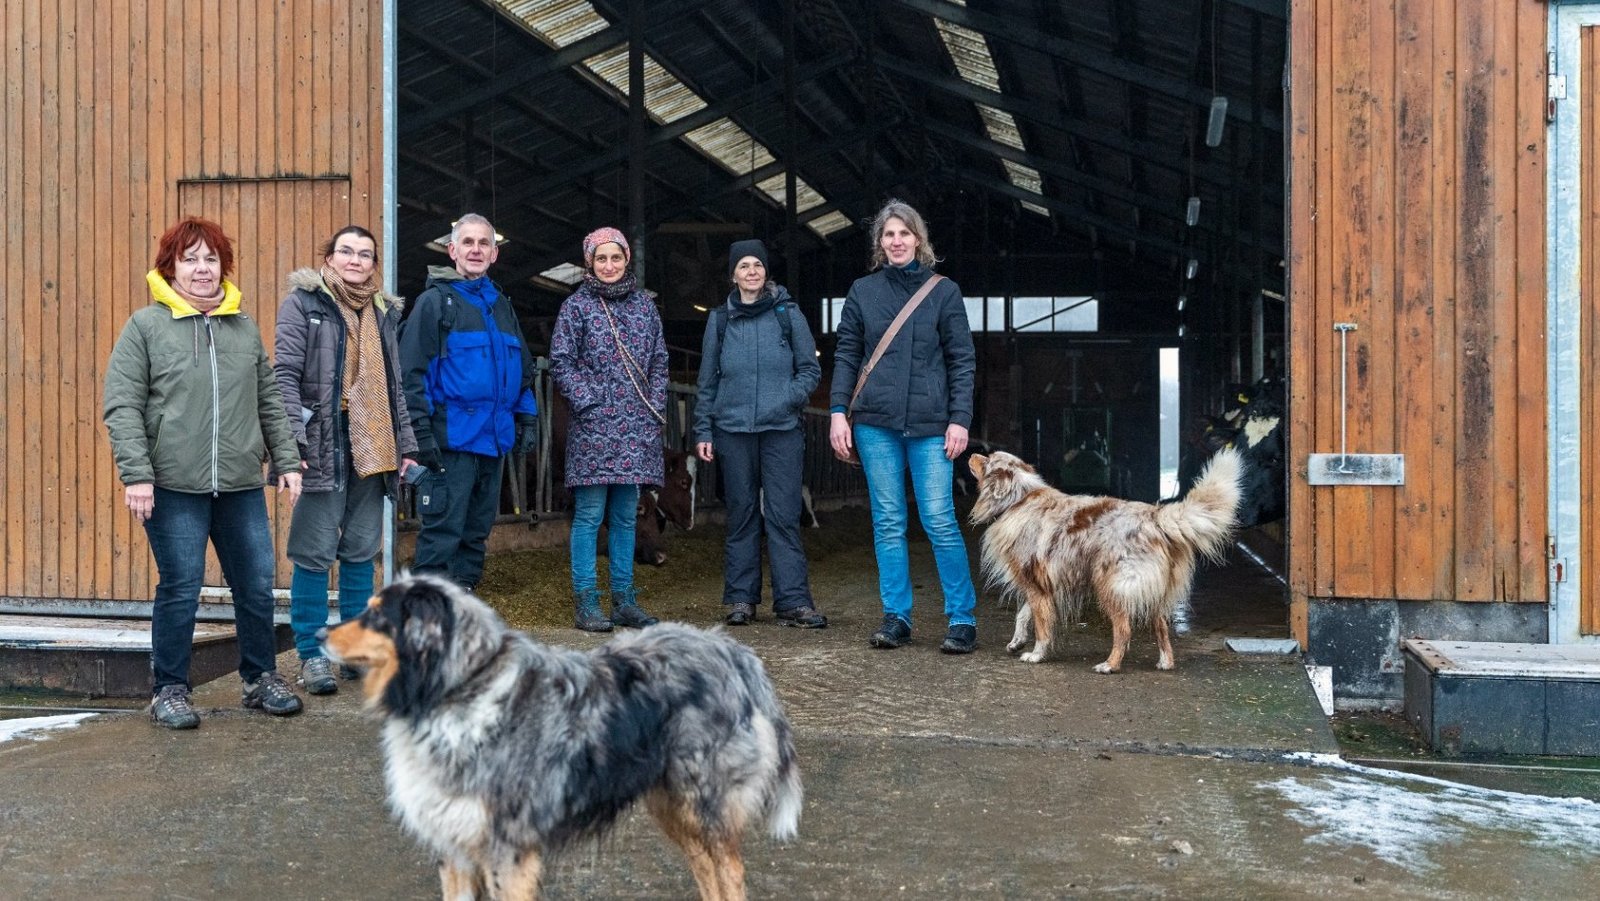 Group of The New Patrons of Waldeck-Frankenberg and two dogs stand at the entrance gate of a farm building.